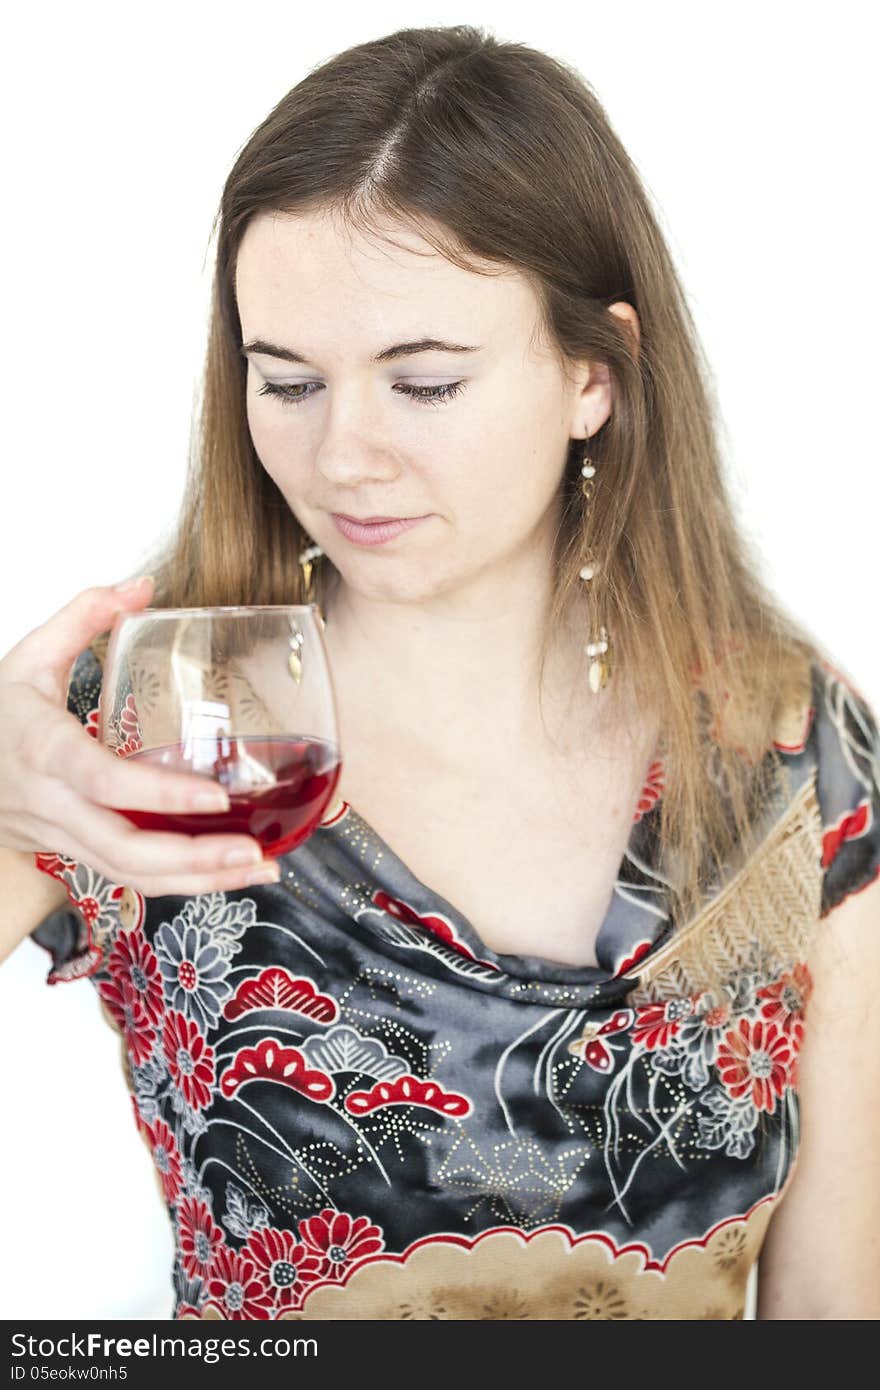 Portrait of a young woman drinking a glass of wine. Portrait of a young woman drinking a glass of wine.